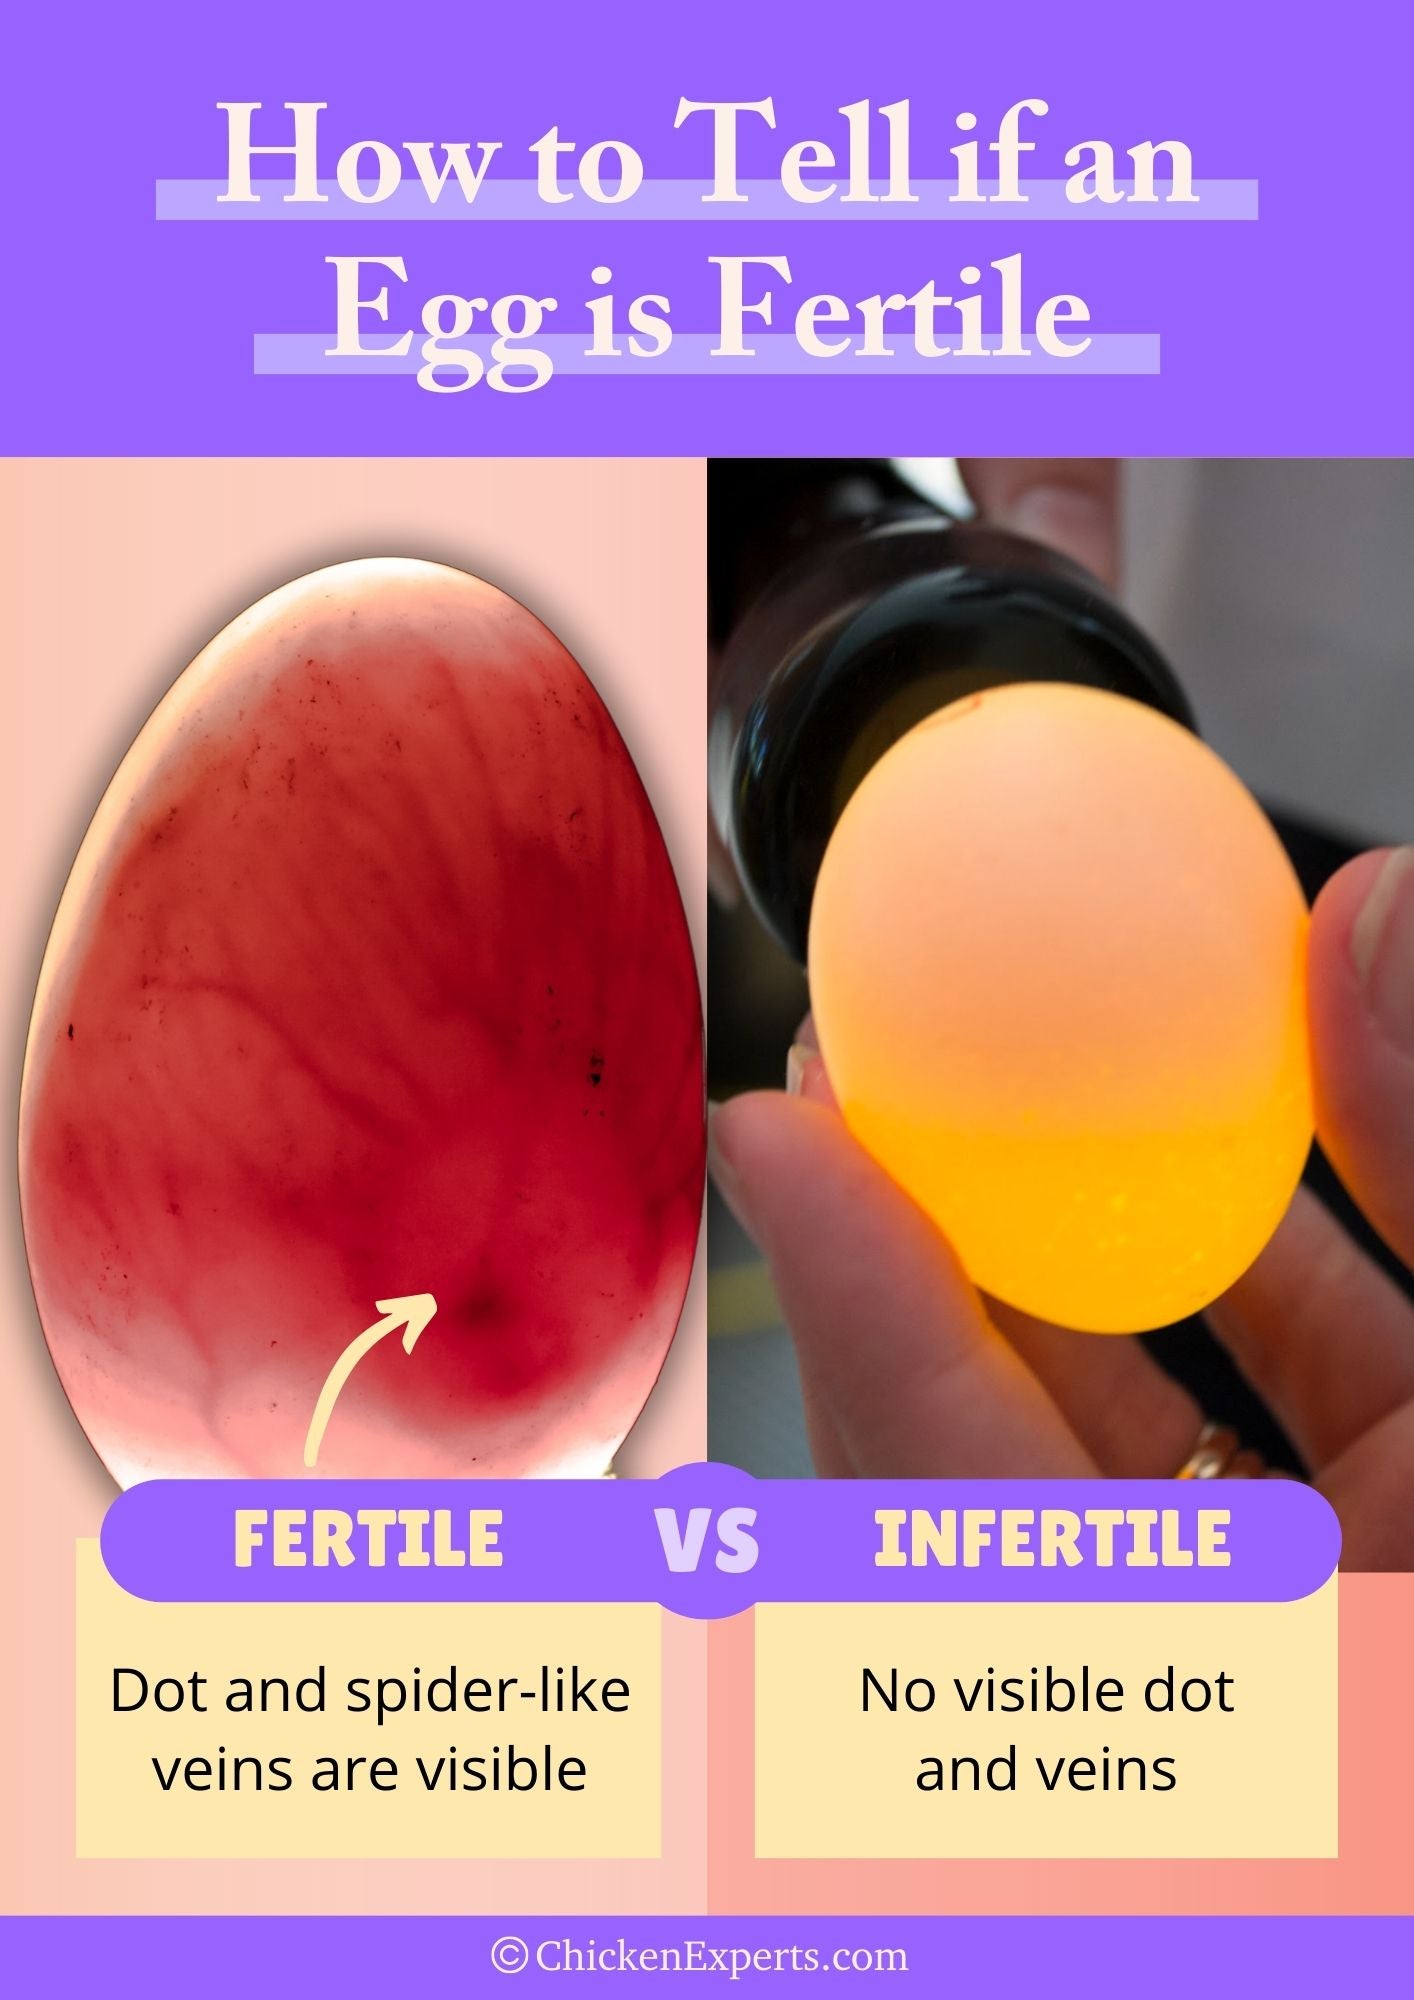 how to tell if an egg is fertile or infertile